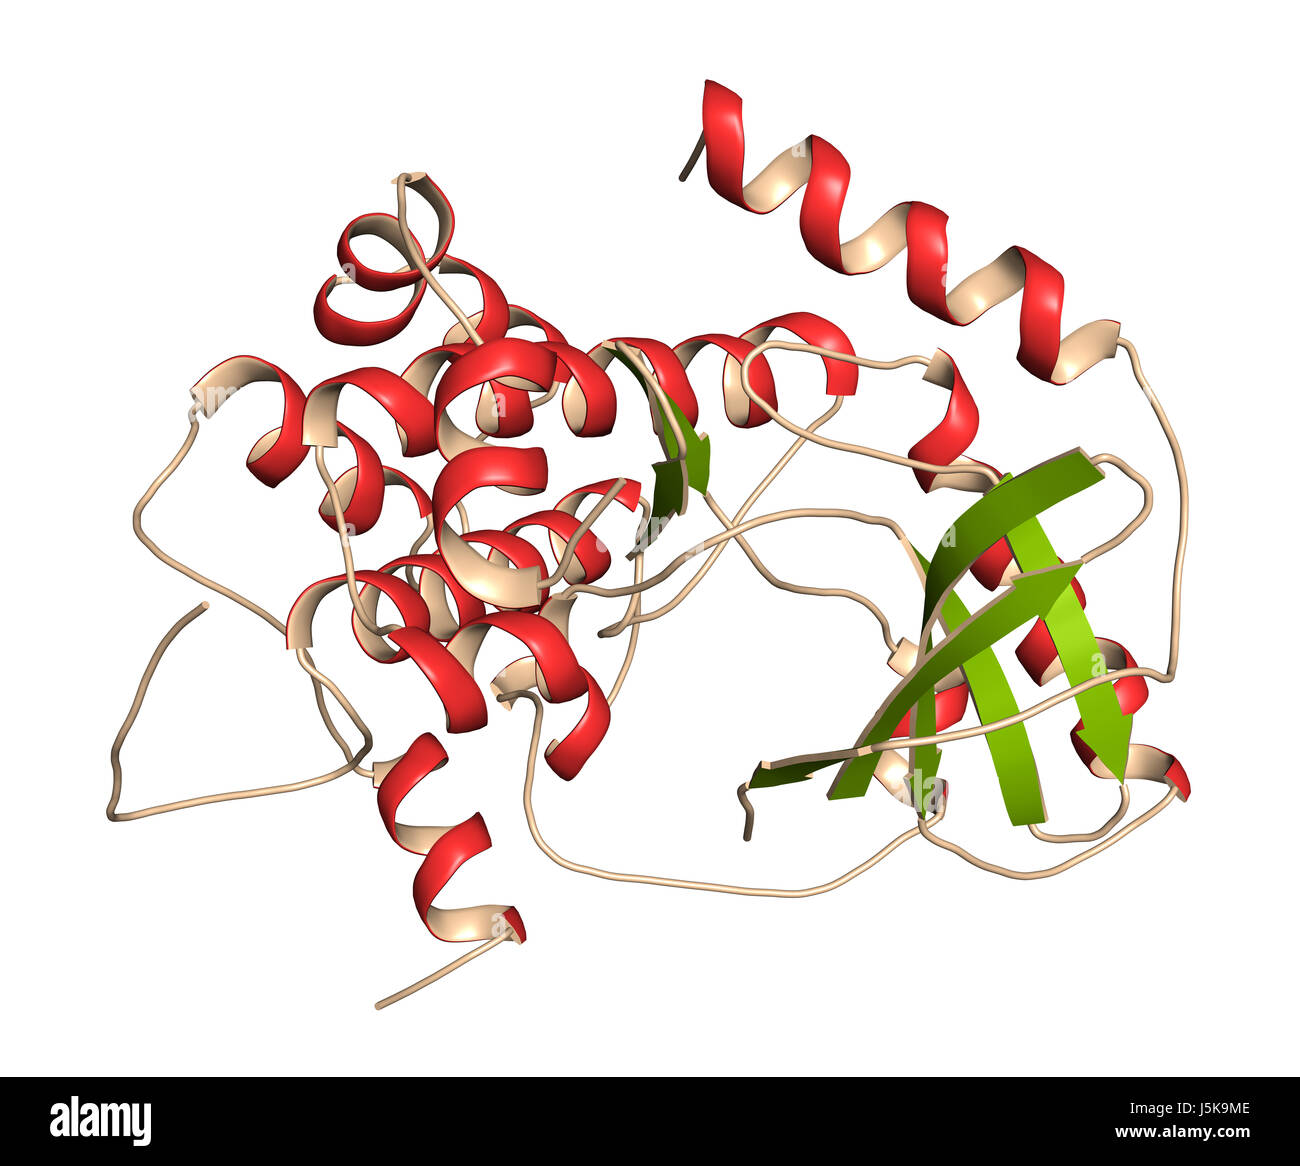 MEK1 or mitogen-activated protein kinase kinase 1 (rabbit) protein. MEK inhibitors are used in treatment of cancer and includes cobimetinib. Stock Photo